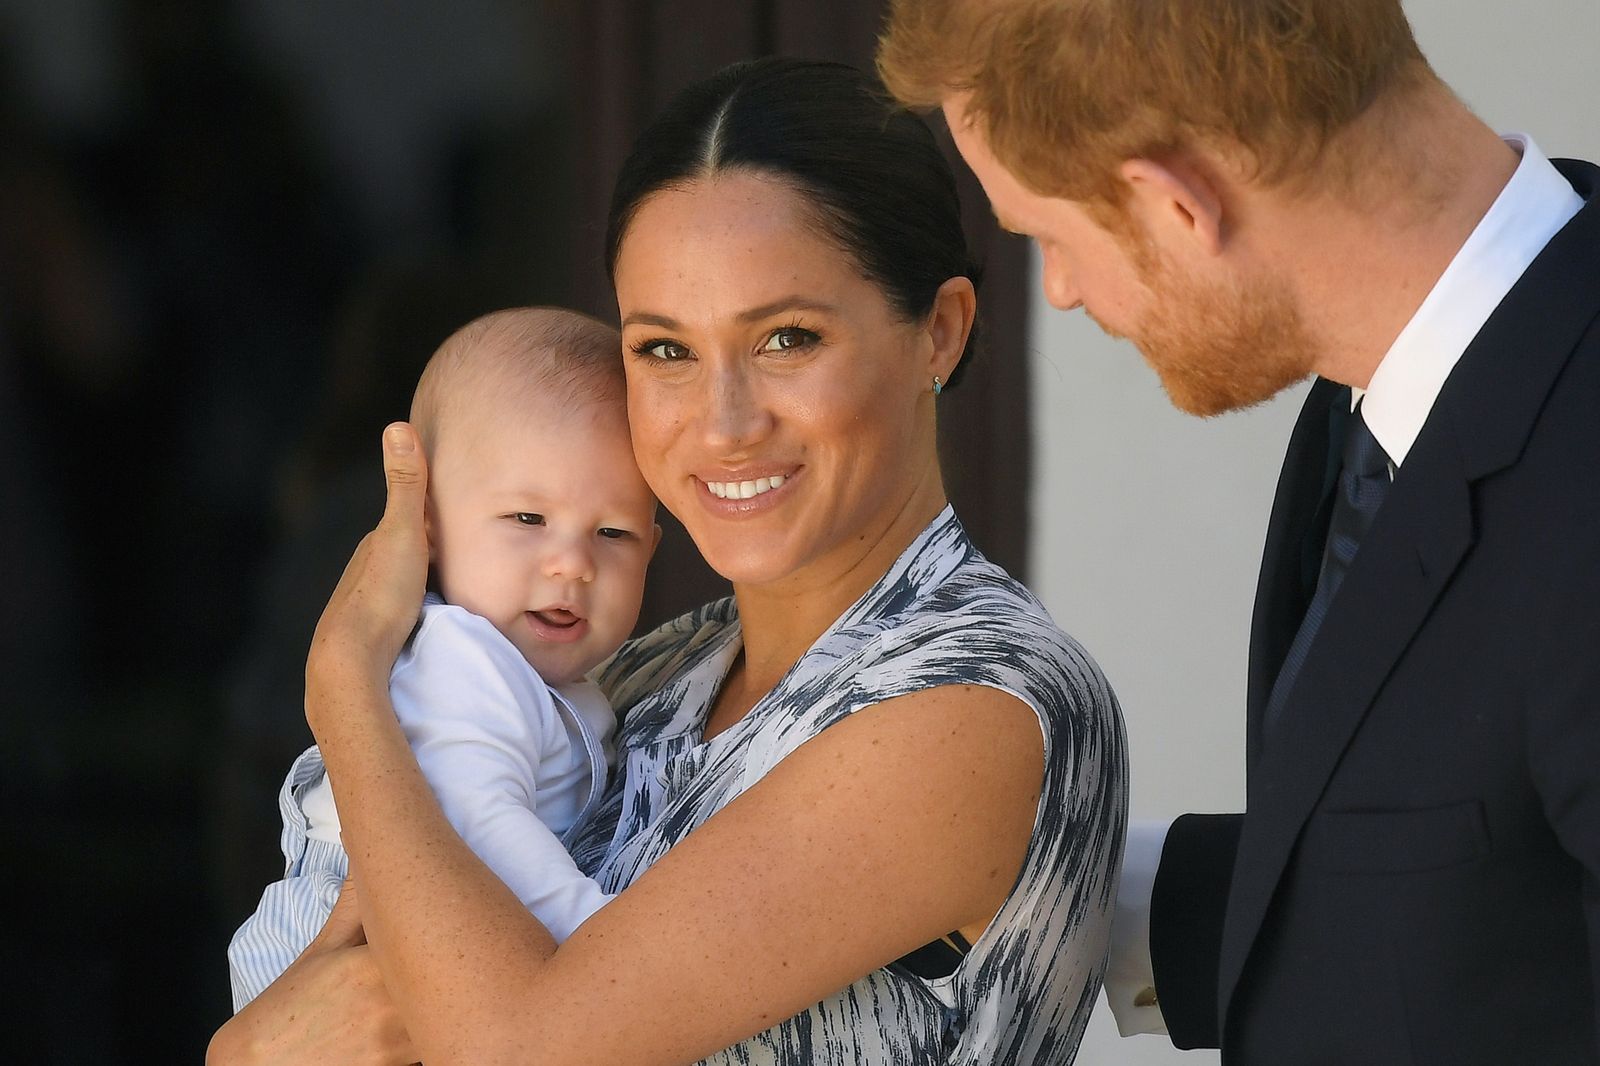 Archie Mountbatten-Windsor, Duchess Meghan, and Prince Harry at a meeting with Archbishop Desmond Tutu during their royal tour of South Africa on September 25, 2019 | Photo: Getty Images